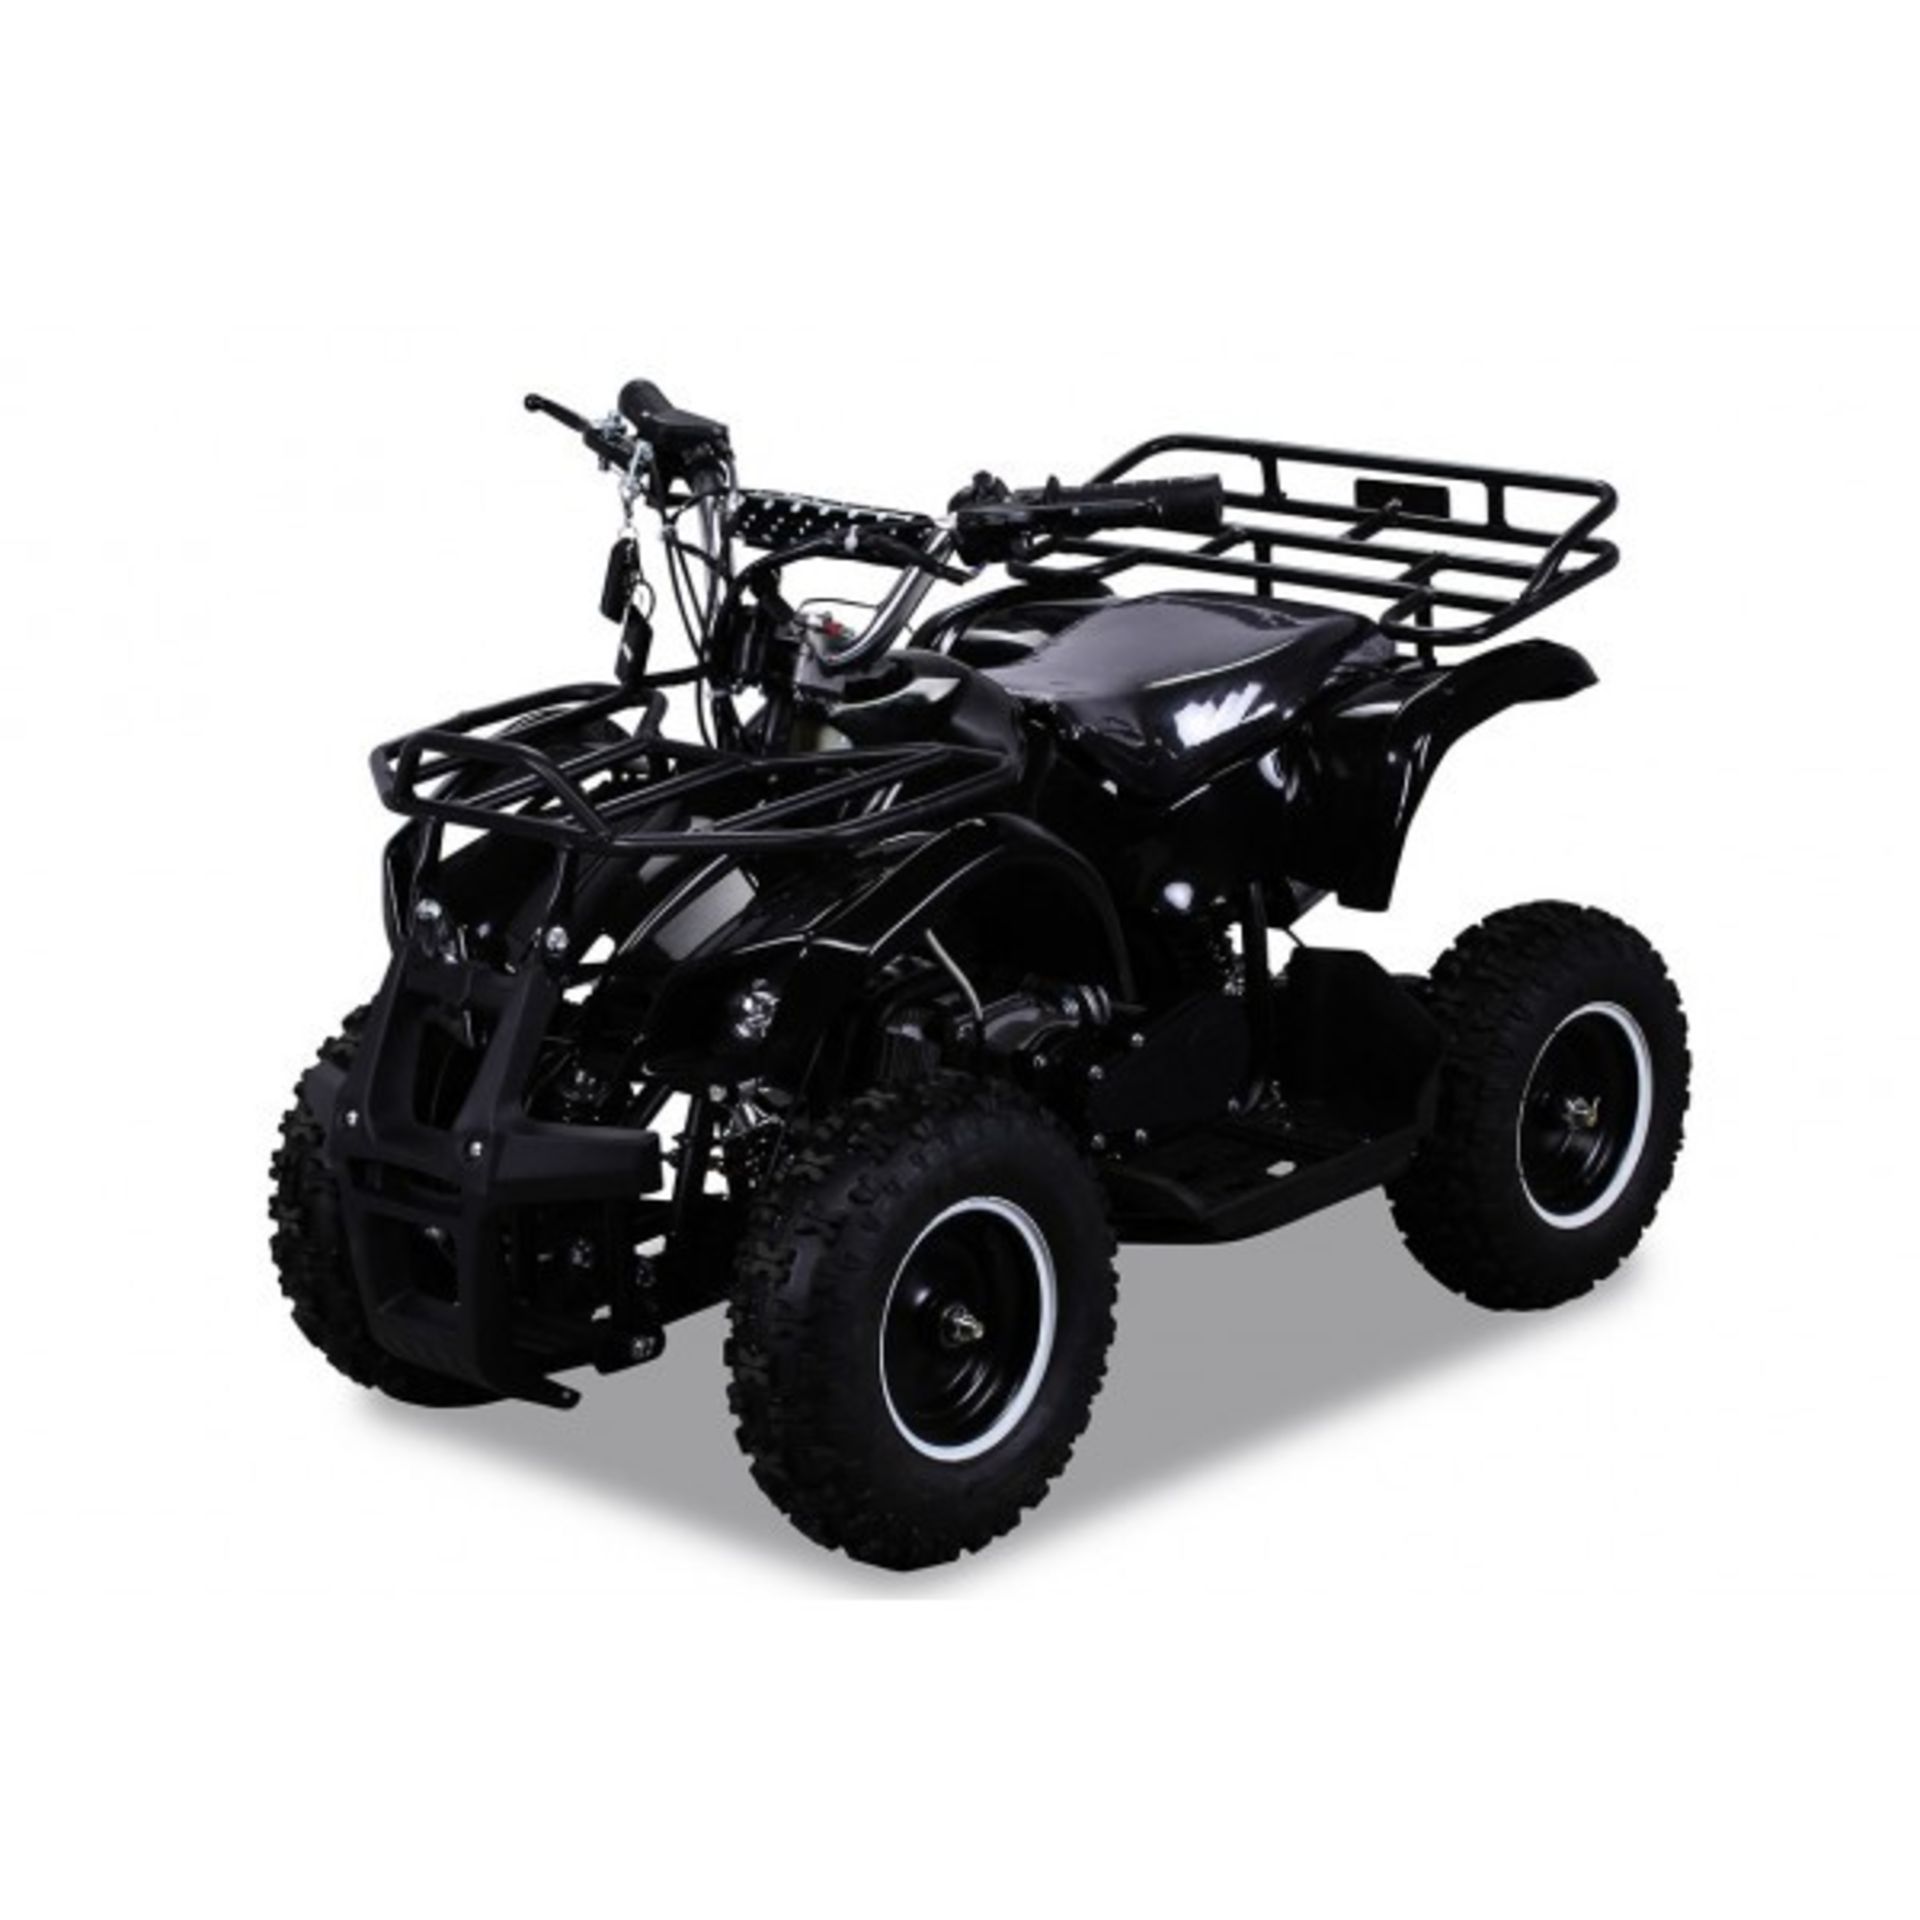 V Brand New 50cc Mini Quad Bike FRM - Colours May Vary - Front & Rear Frames - Picture May Vary From